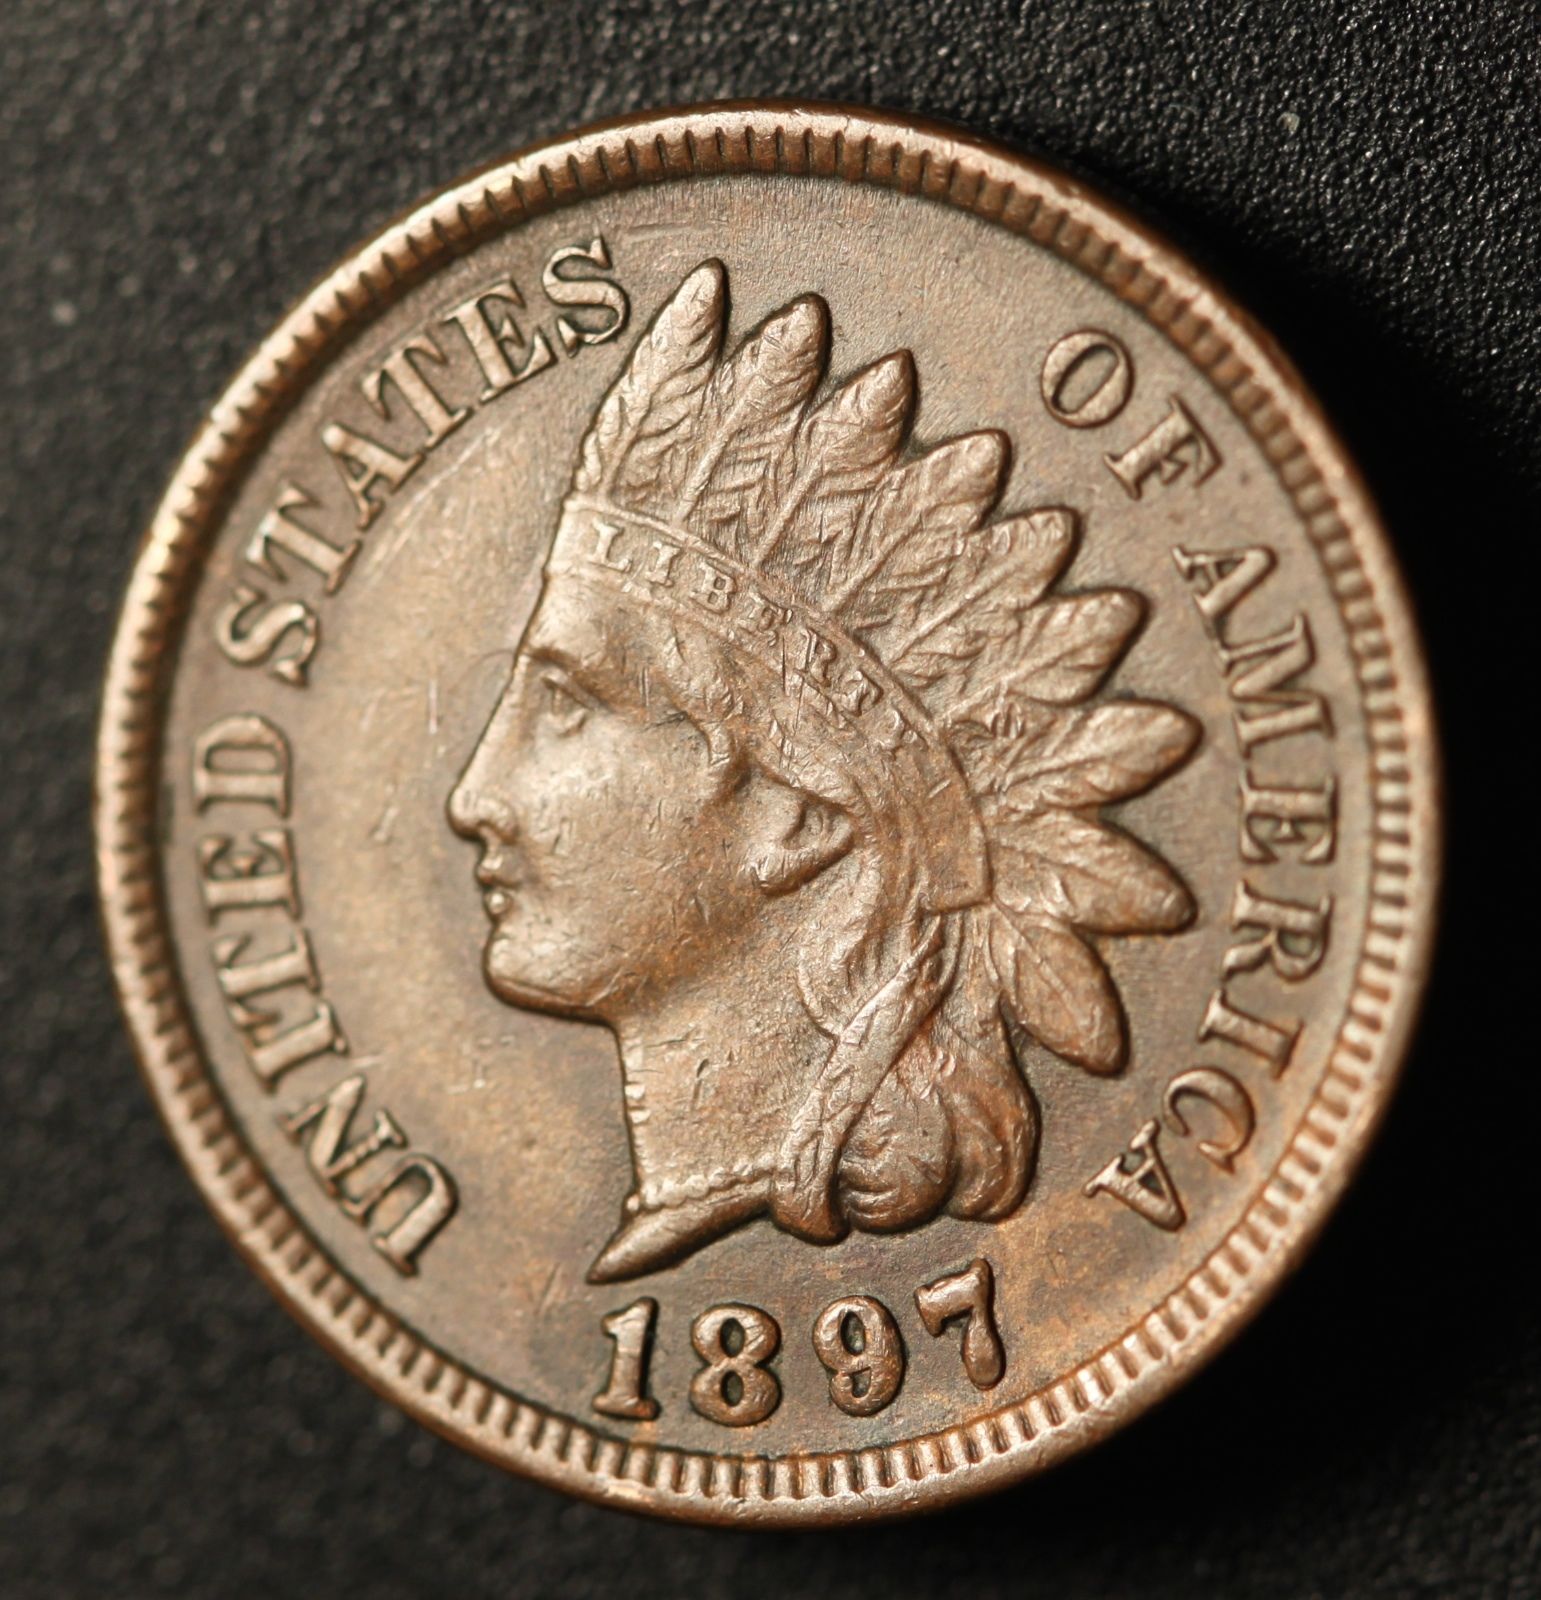 1897 RPD-020 Indian Head Penny - Photo by Ed Nathanson